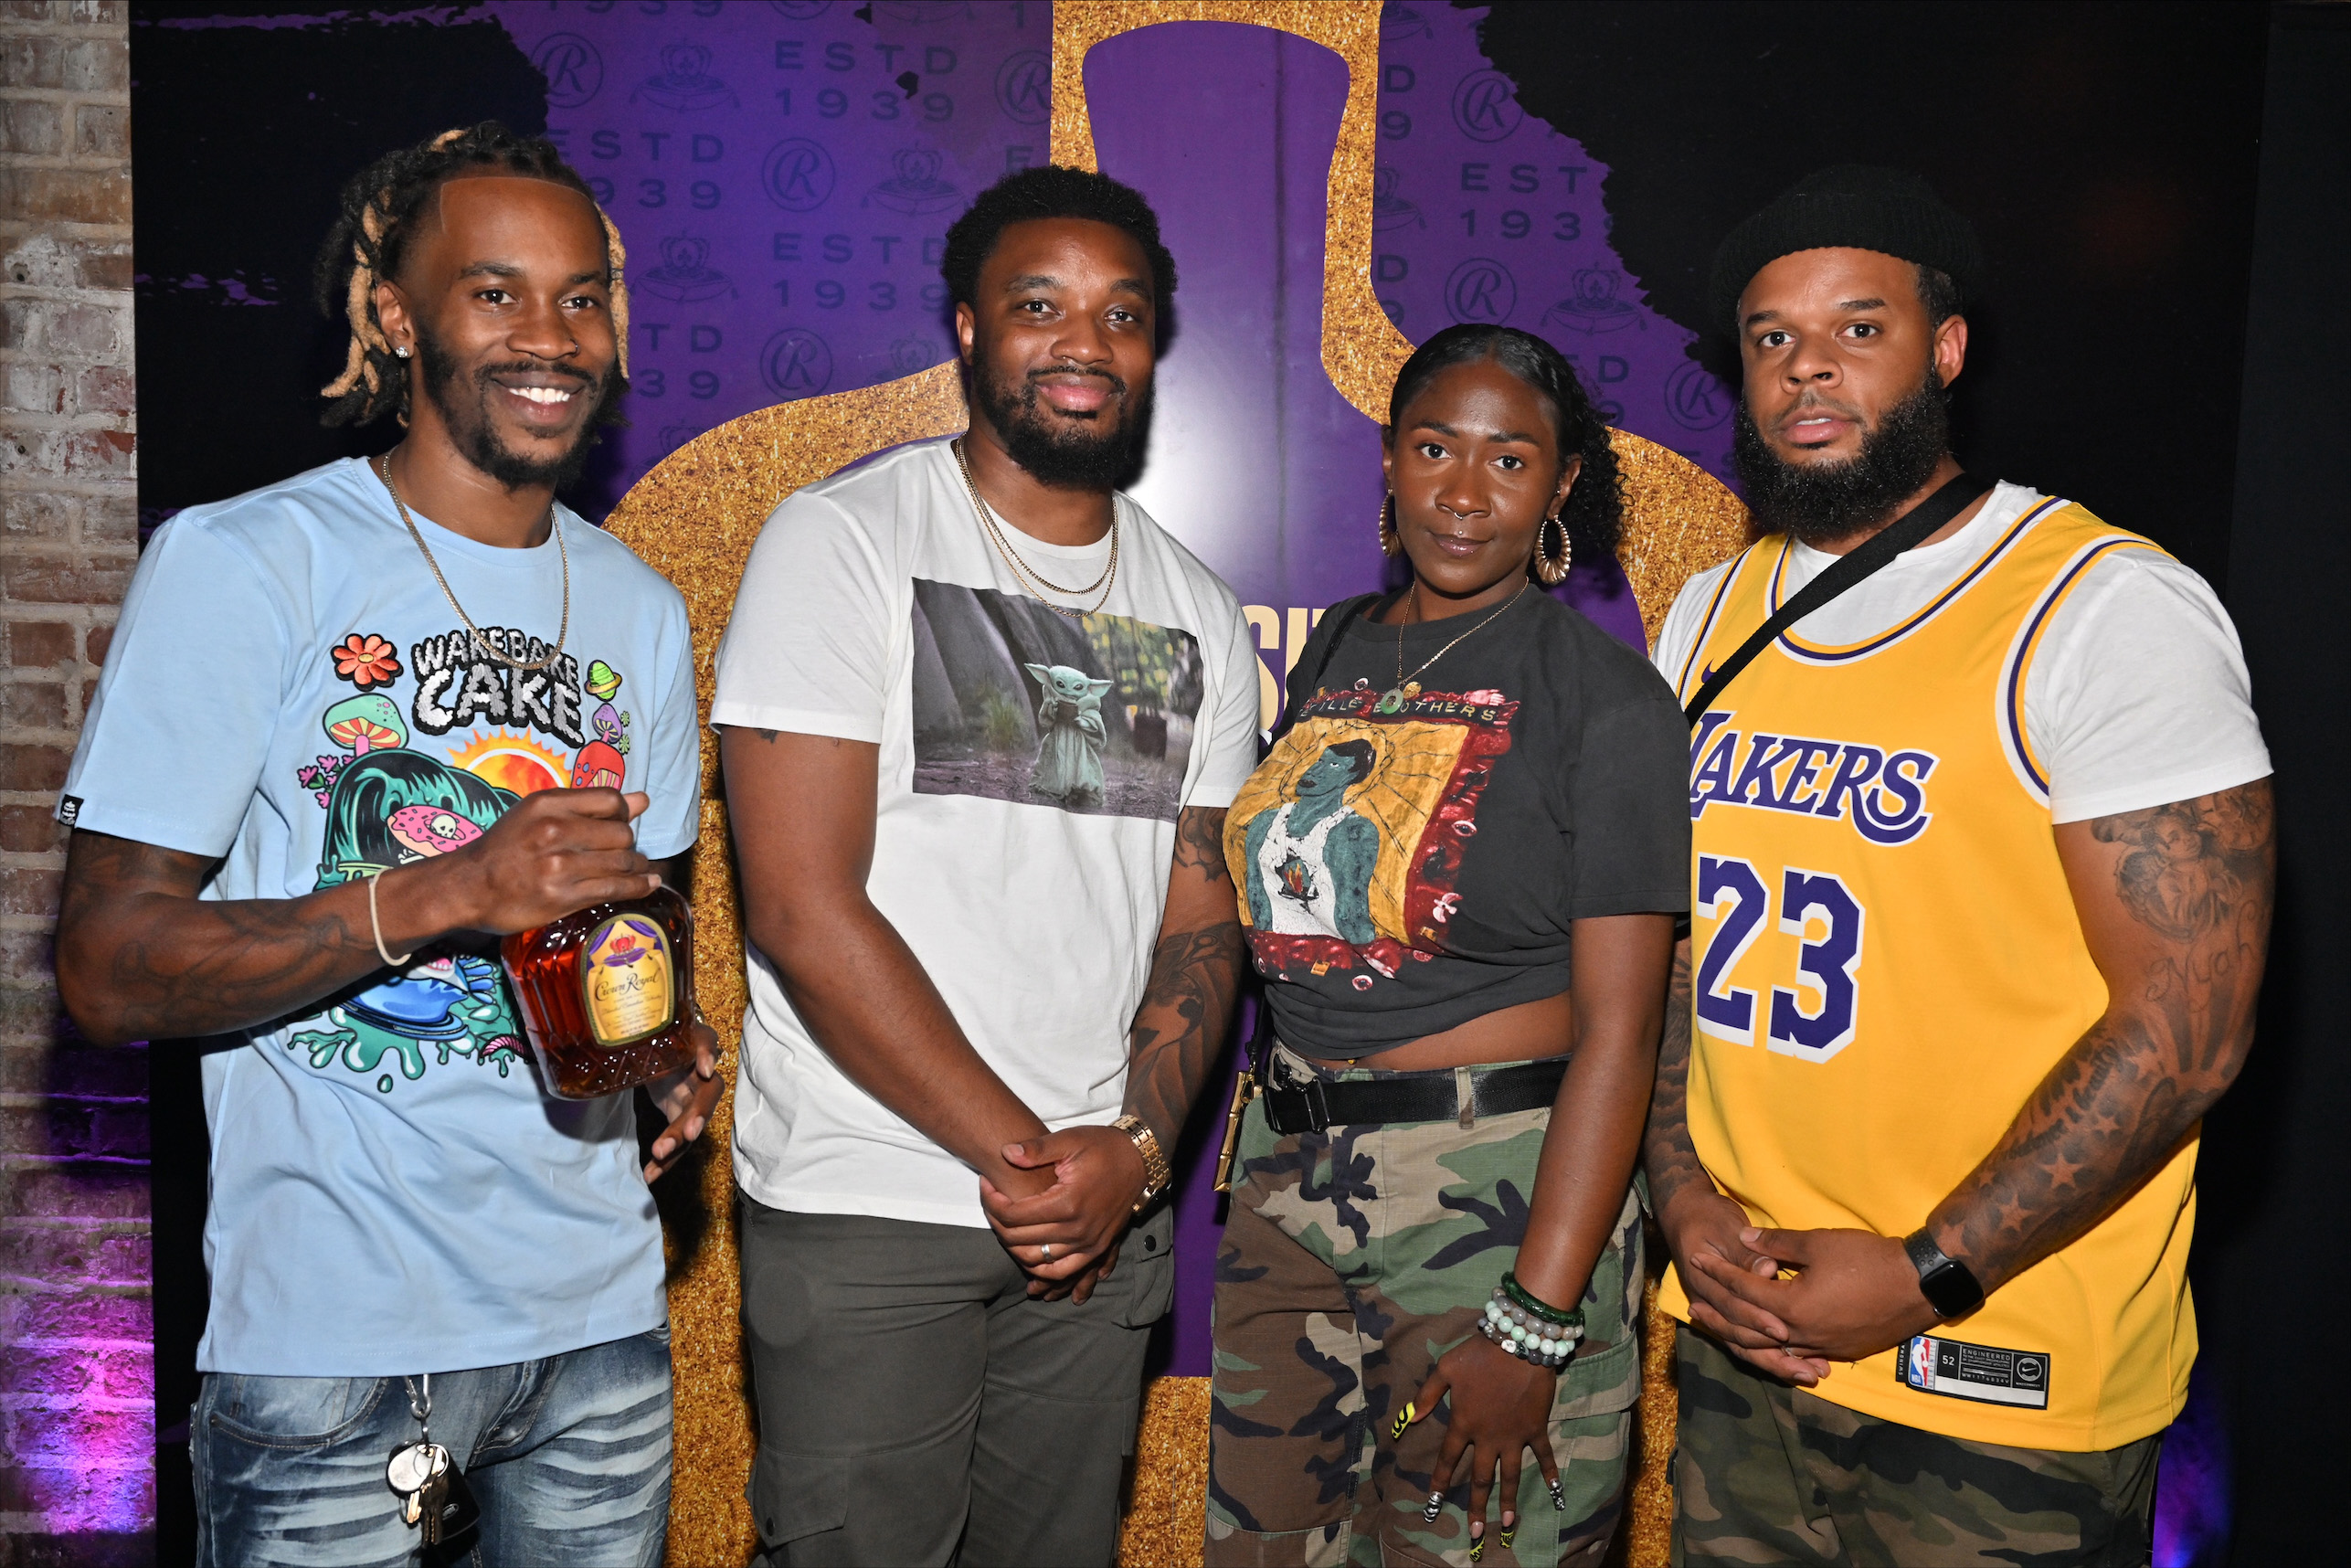 Small beauty business owners in Atlanta were honored at Crown Royal’s Generosity Hour with access to educational and monetary resources as a thank you for the cultural impact and contributions they have on their community.